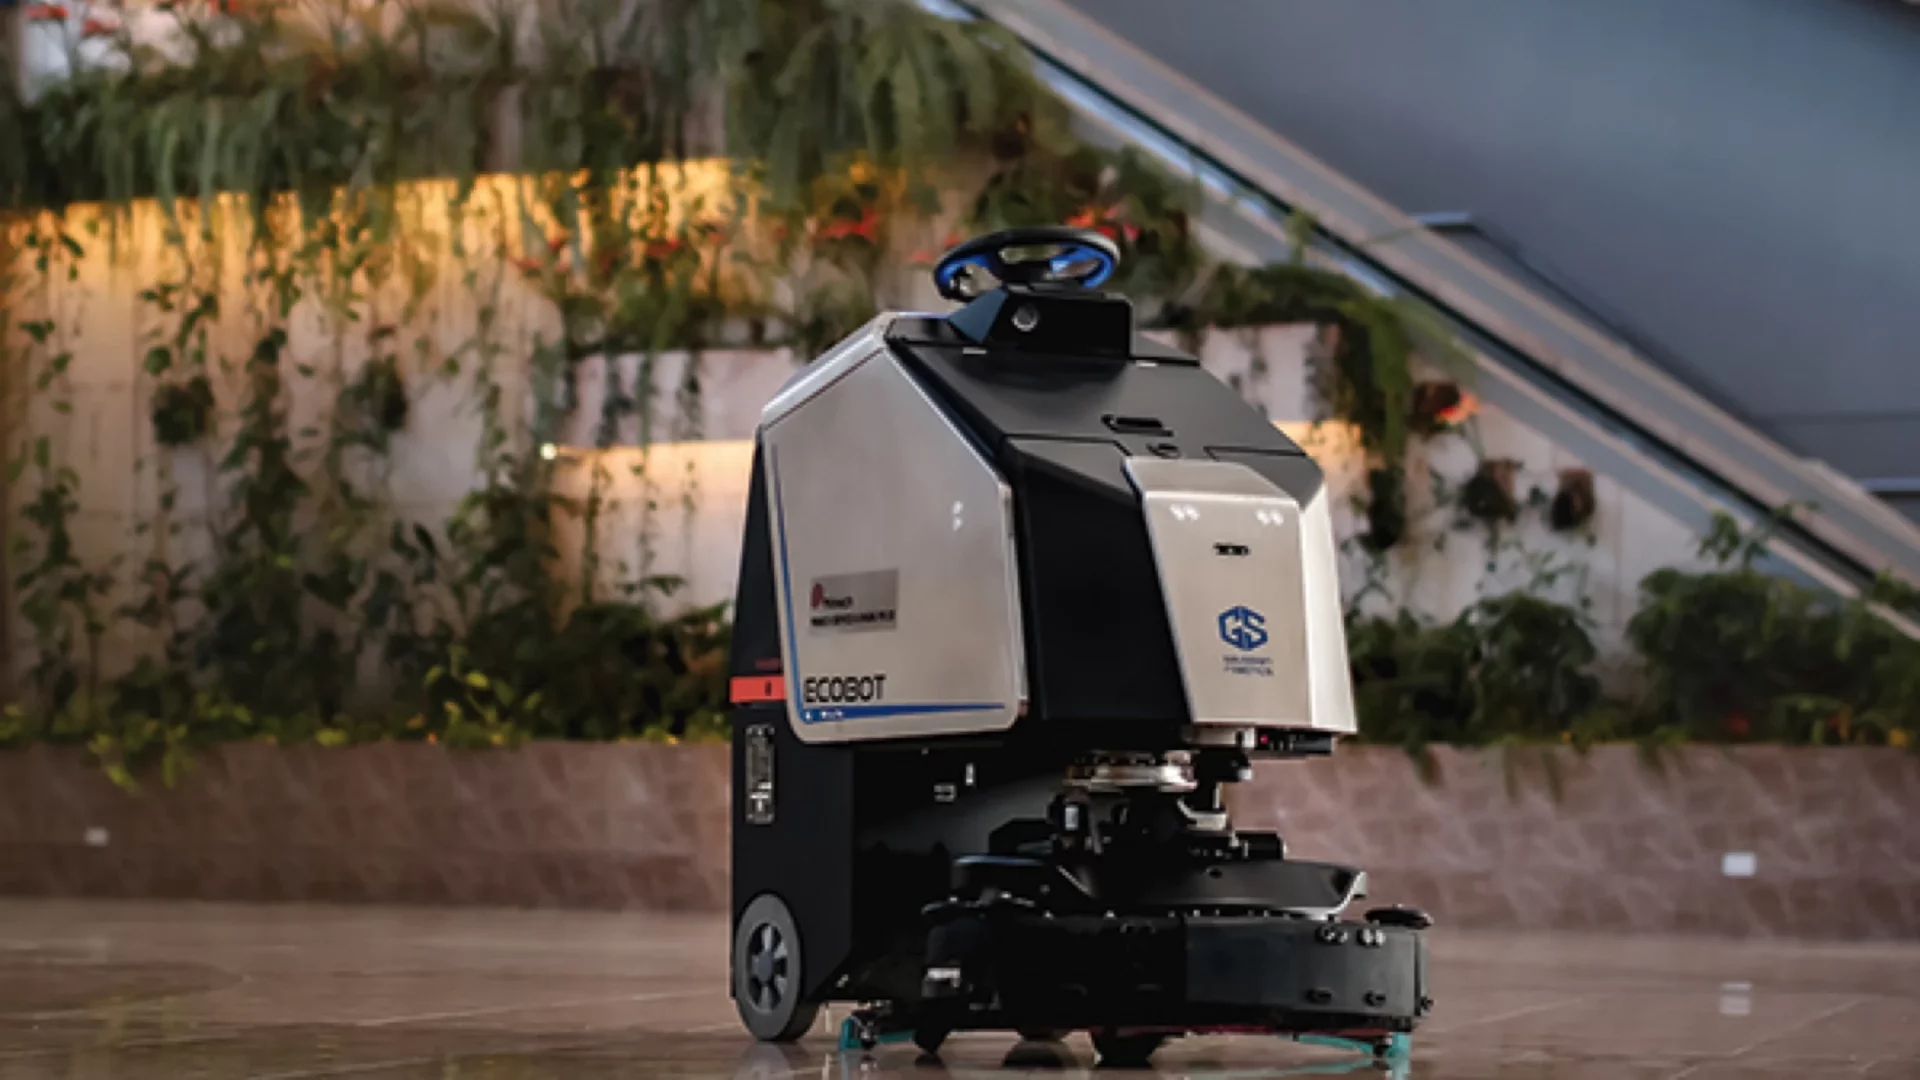 Image of cleaning robot, Scrubber 75, in a venue